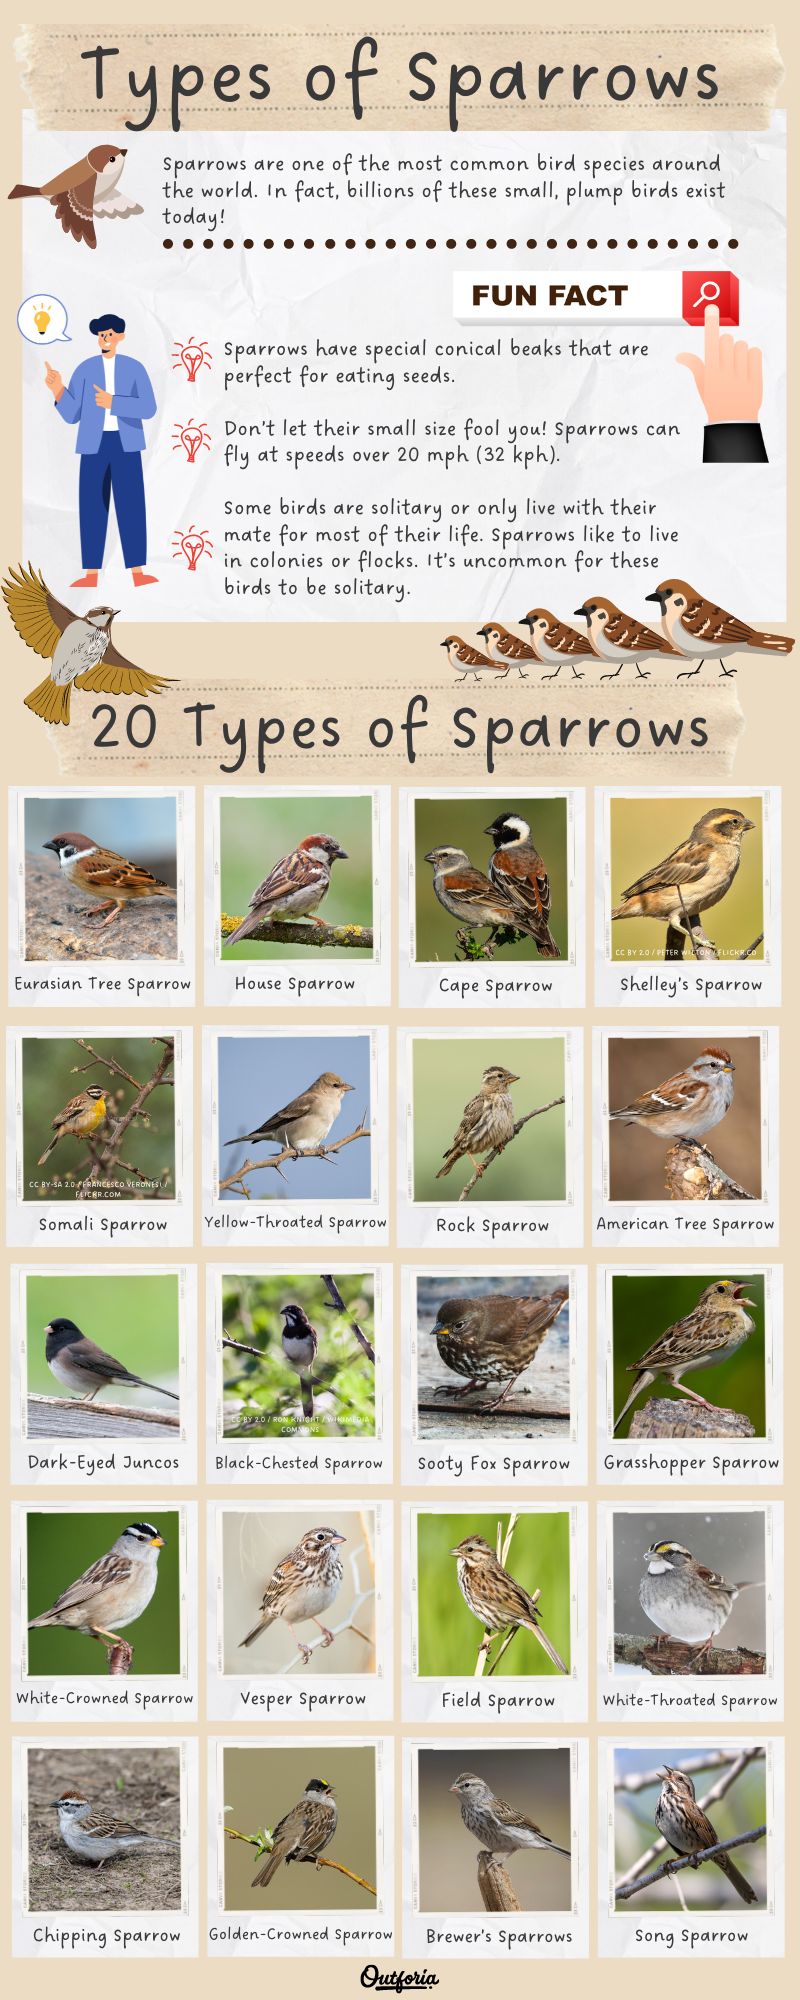 Chat of different sparrow species complete with photos, facts, guide, and more